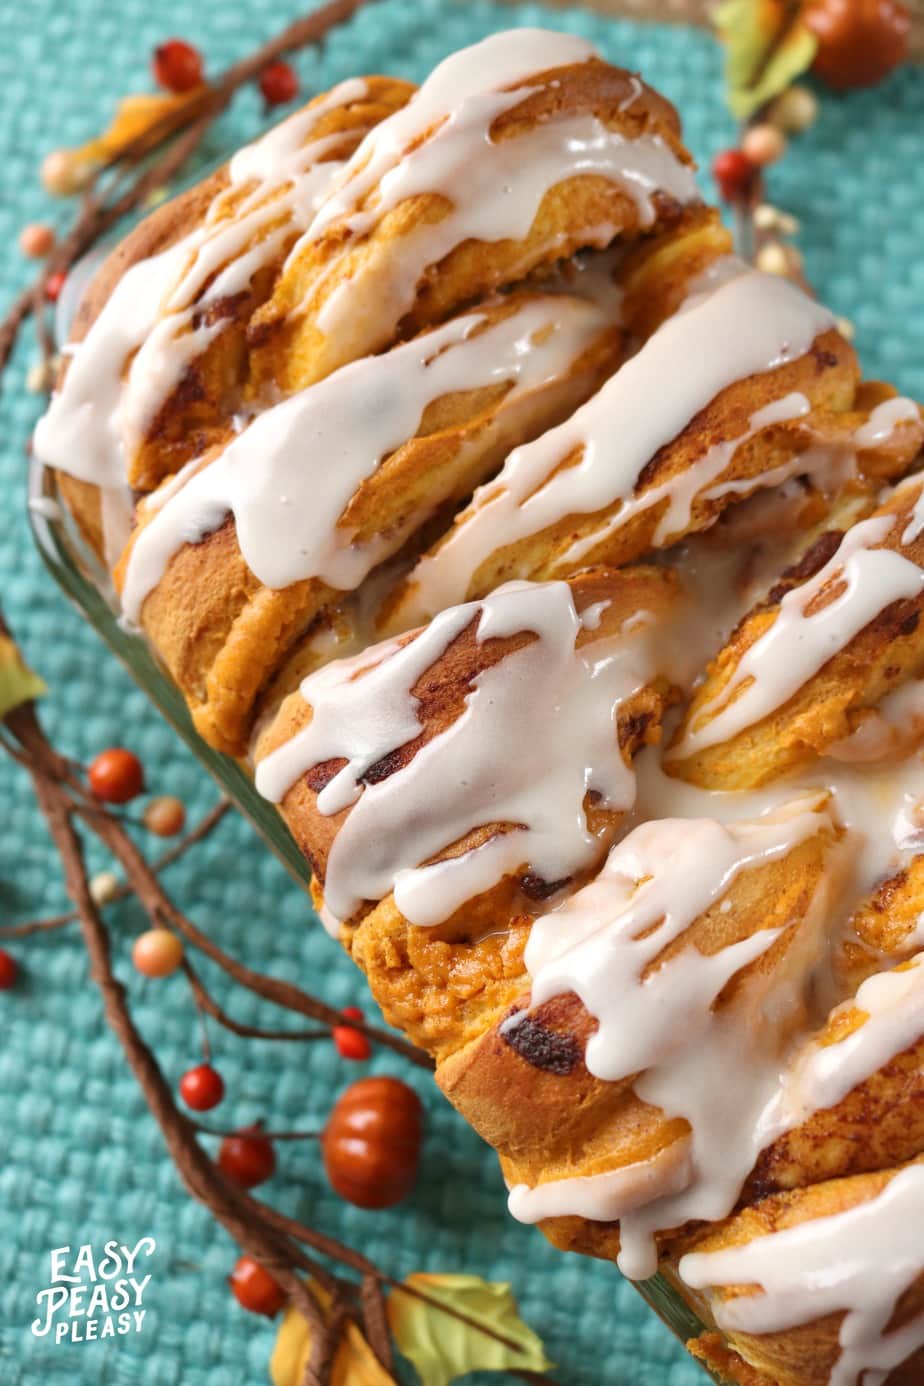 All you need are 4 ingredients and a can of cinnamon rolls to make this super easy 5 Ingredient Cinnamon Pumpkin Pull Apart Bread. Yum!